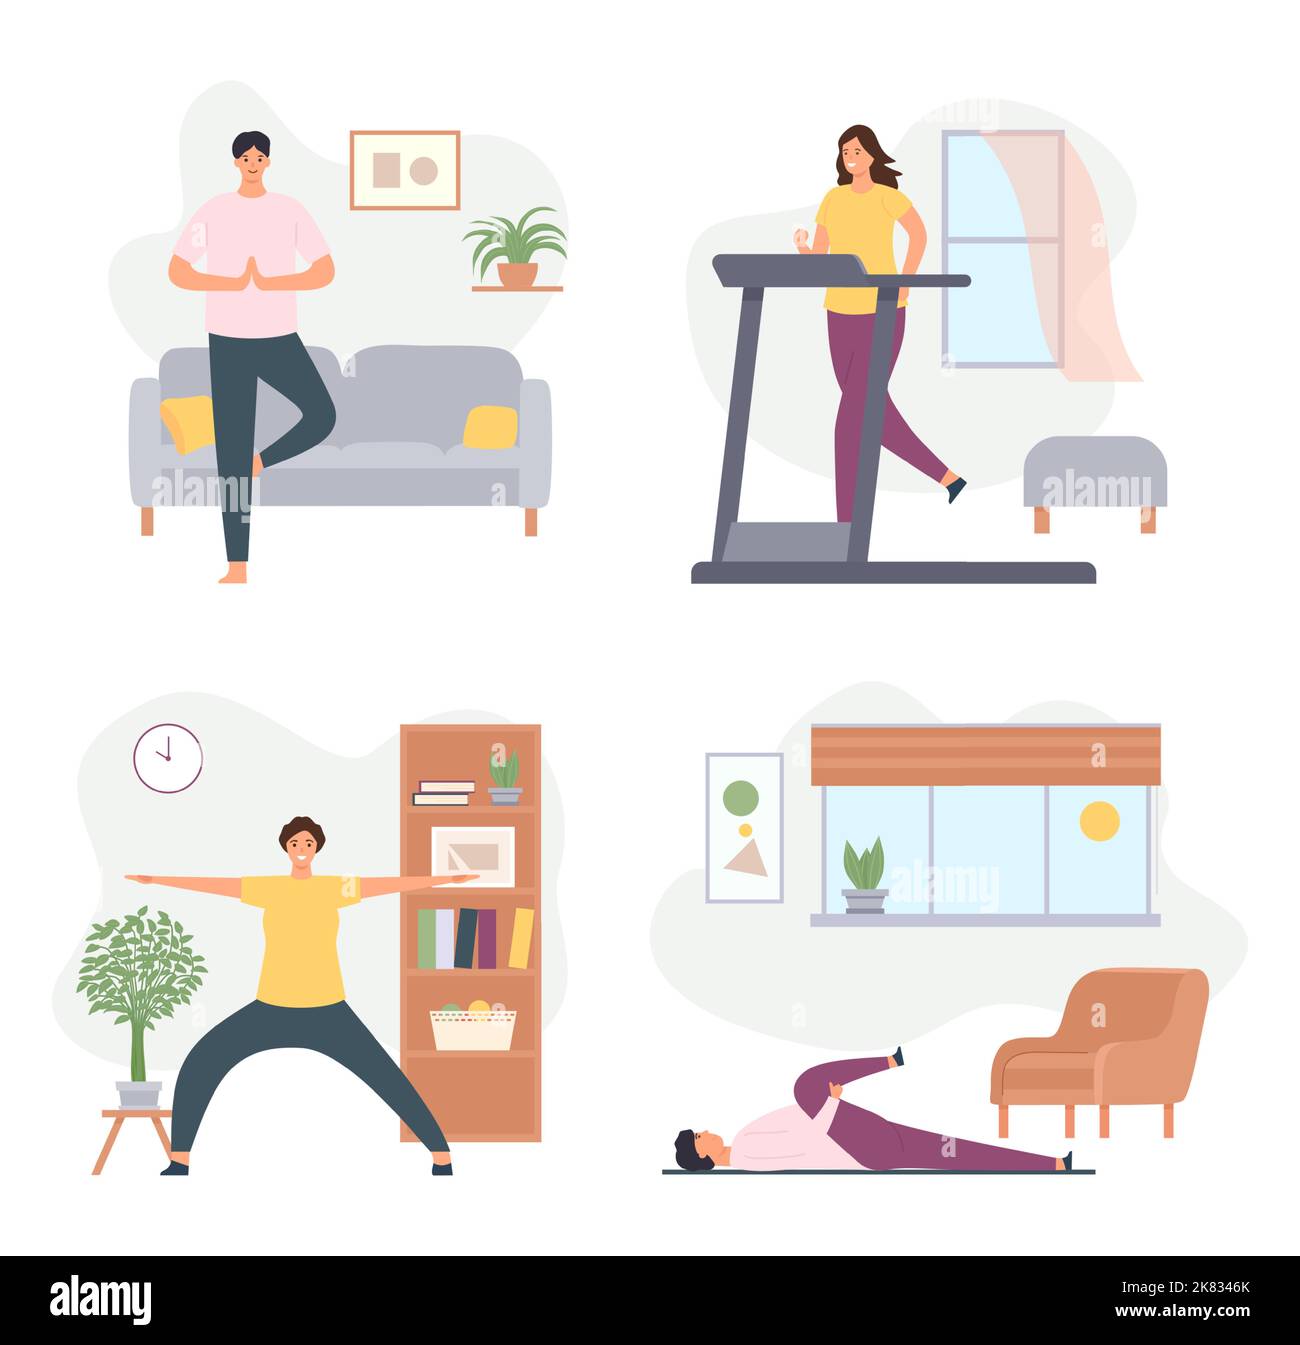 Home exercises. Male and female characters doing yoga. Woman training on treadmill, man stretching. Healthy lifestyle Stock Vector